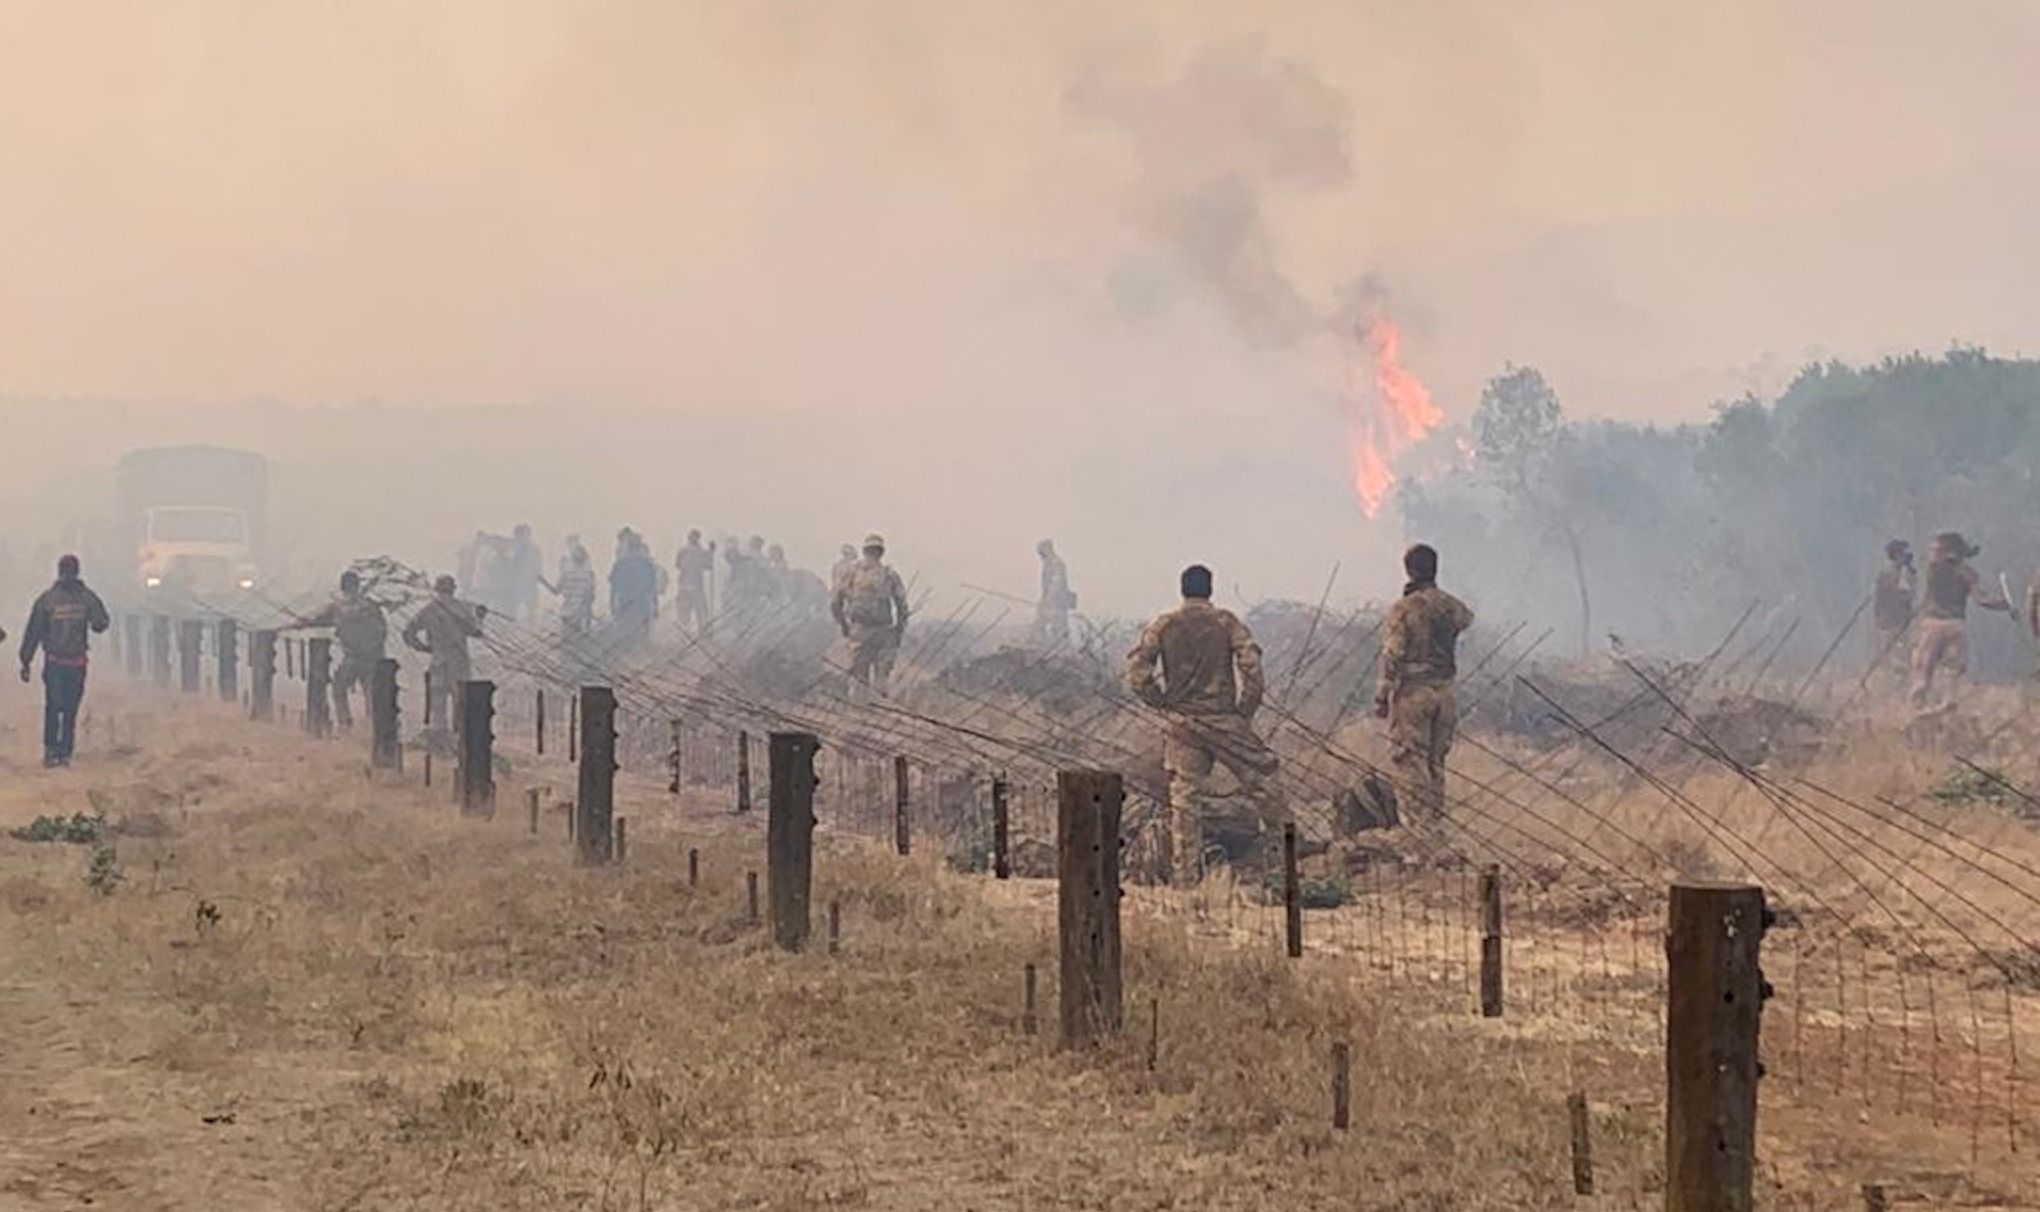 British troops sparked a major fire in Kenya on 23 March 2021 (Photo: MOD)